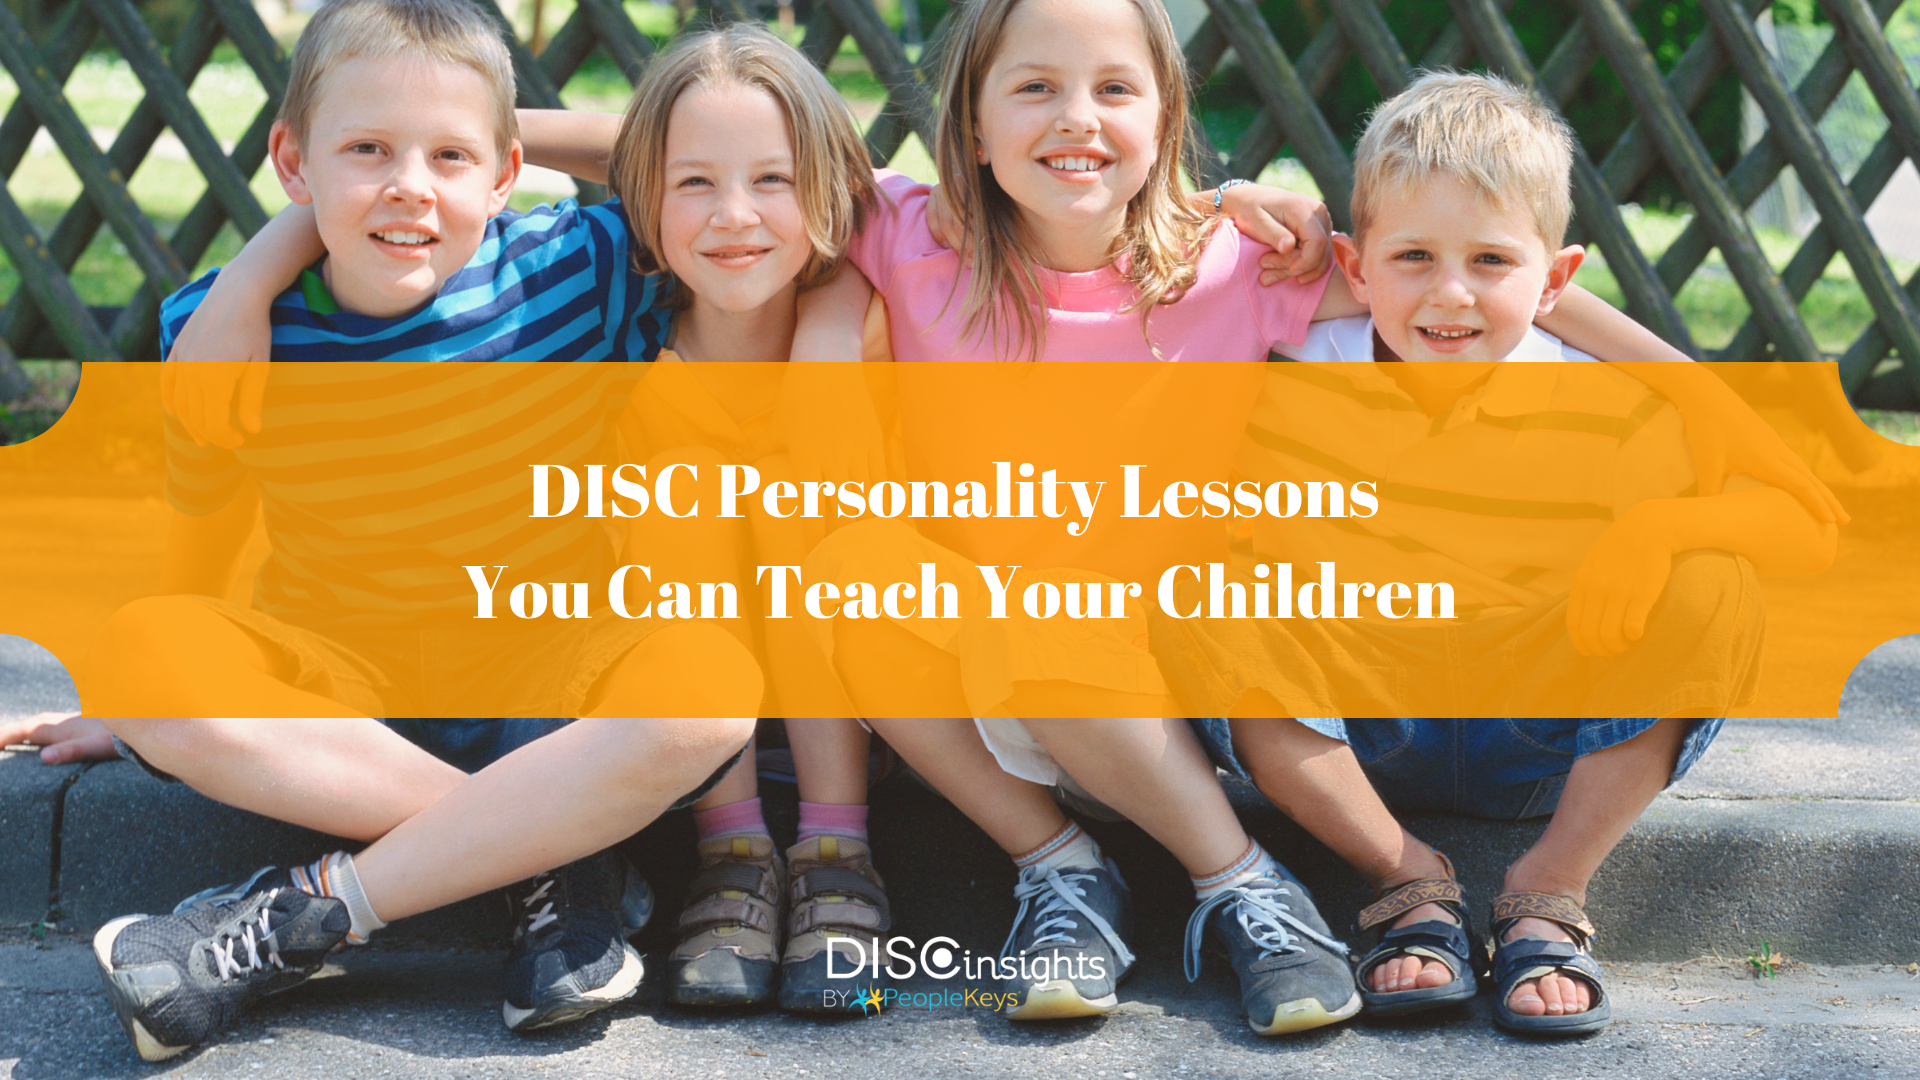 DISC Personality Lessons You Can Teach Your Children